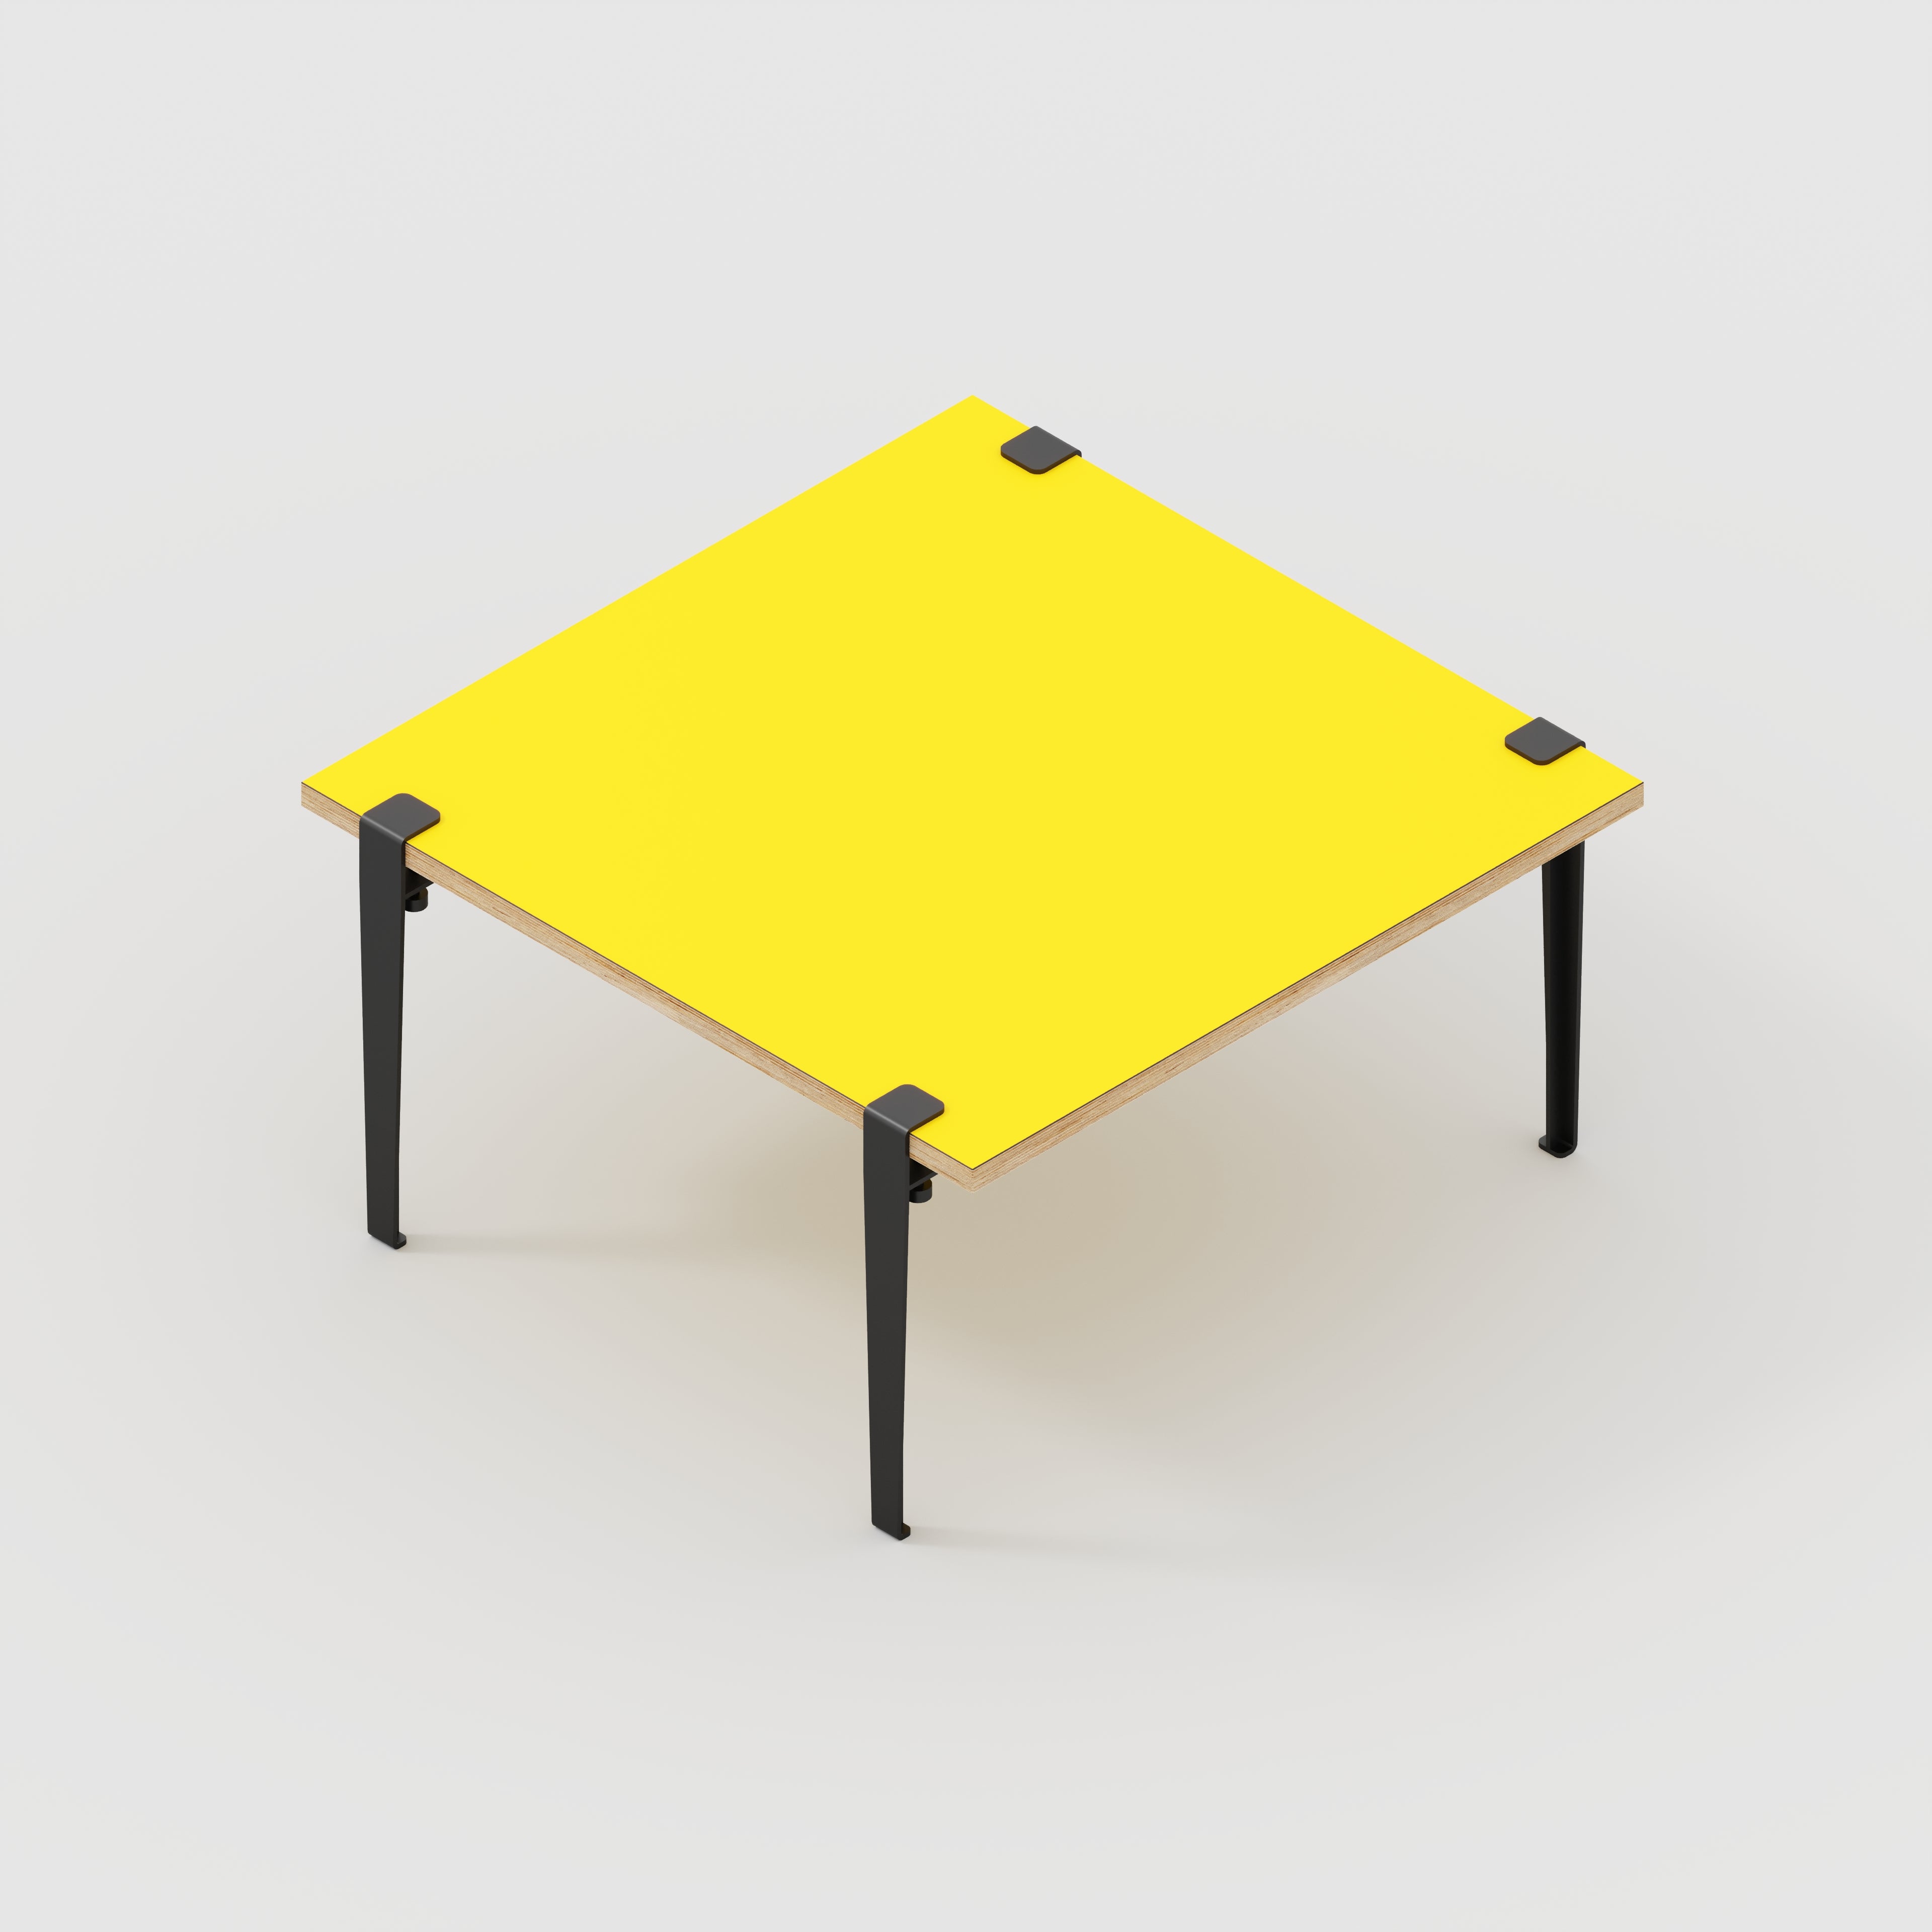 Plywood Coffee Table with Black Tiptoe Legs - Formica Chrome Yellow - 800(w) x 800(d) x 430(h)